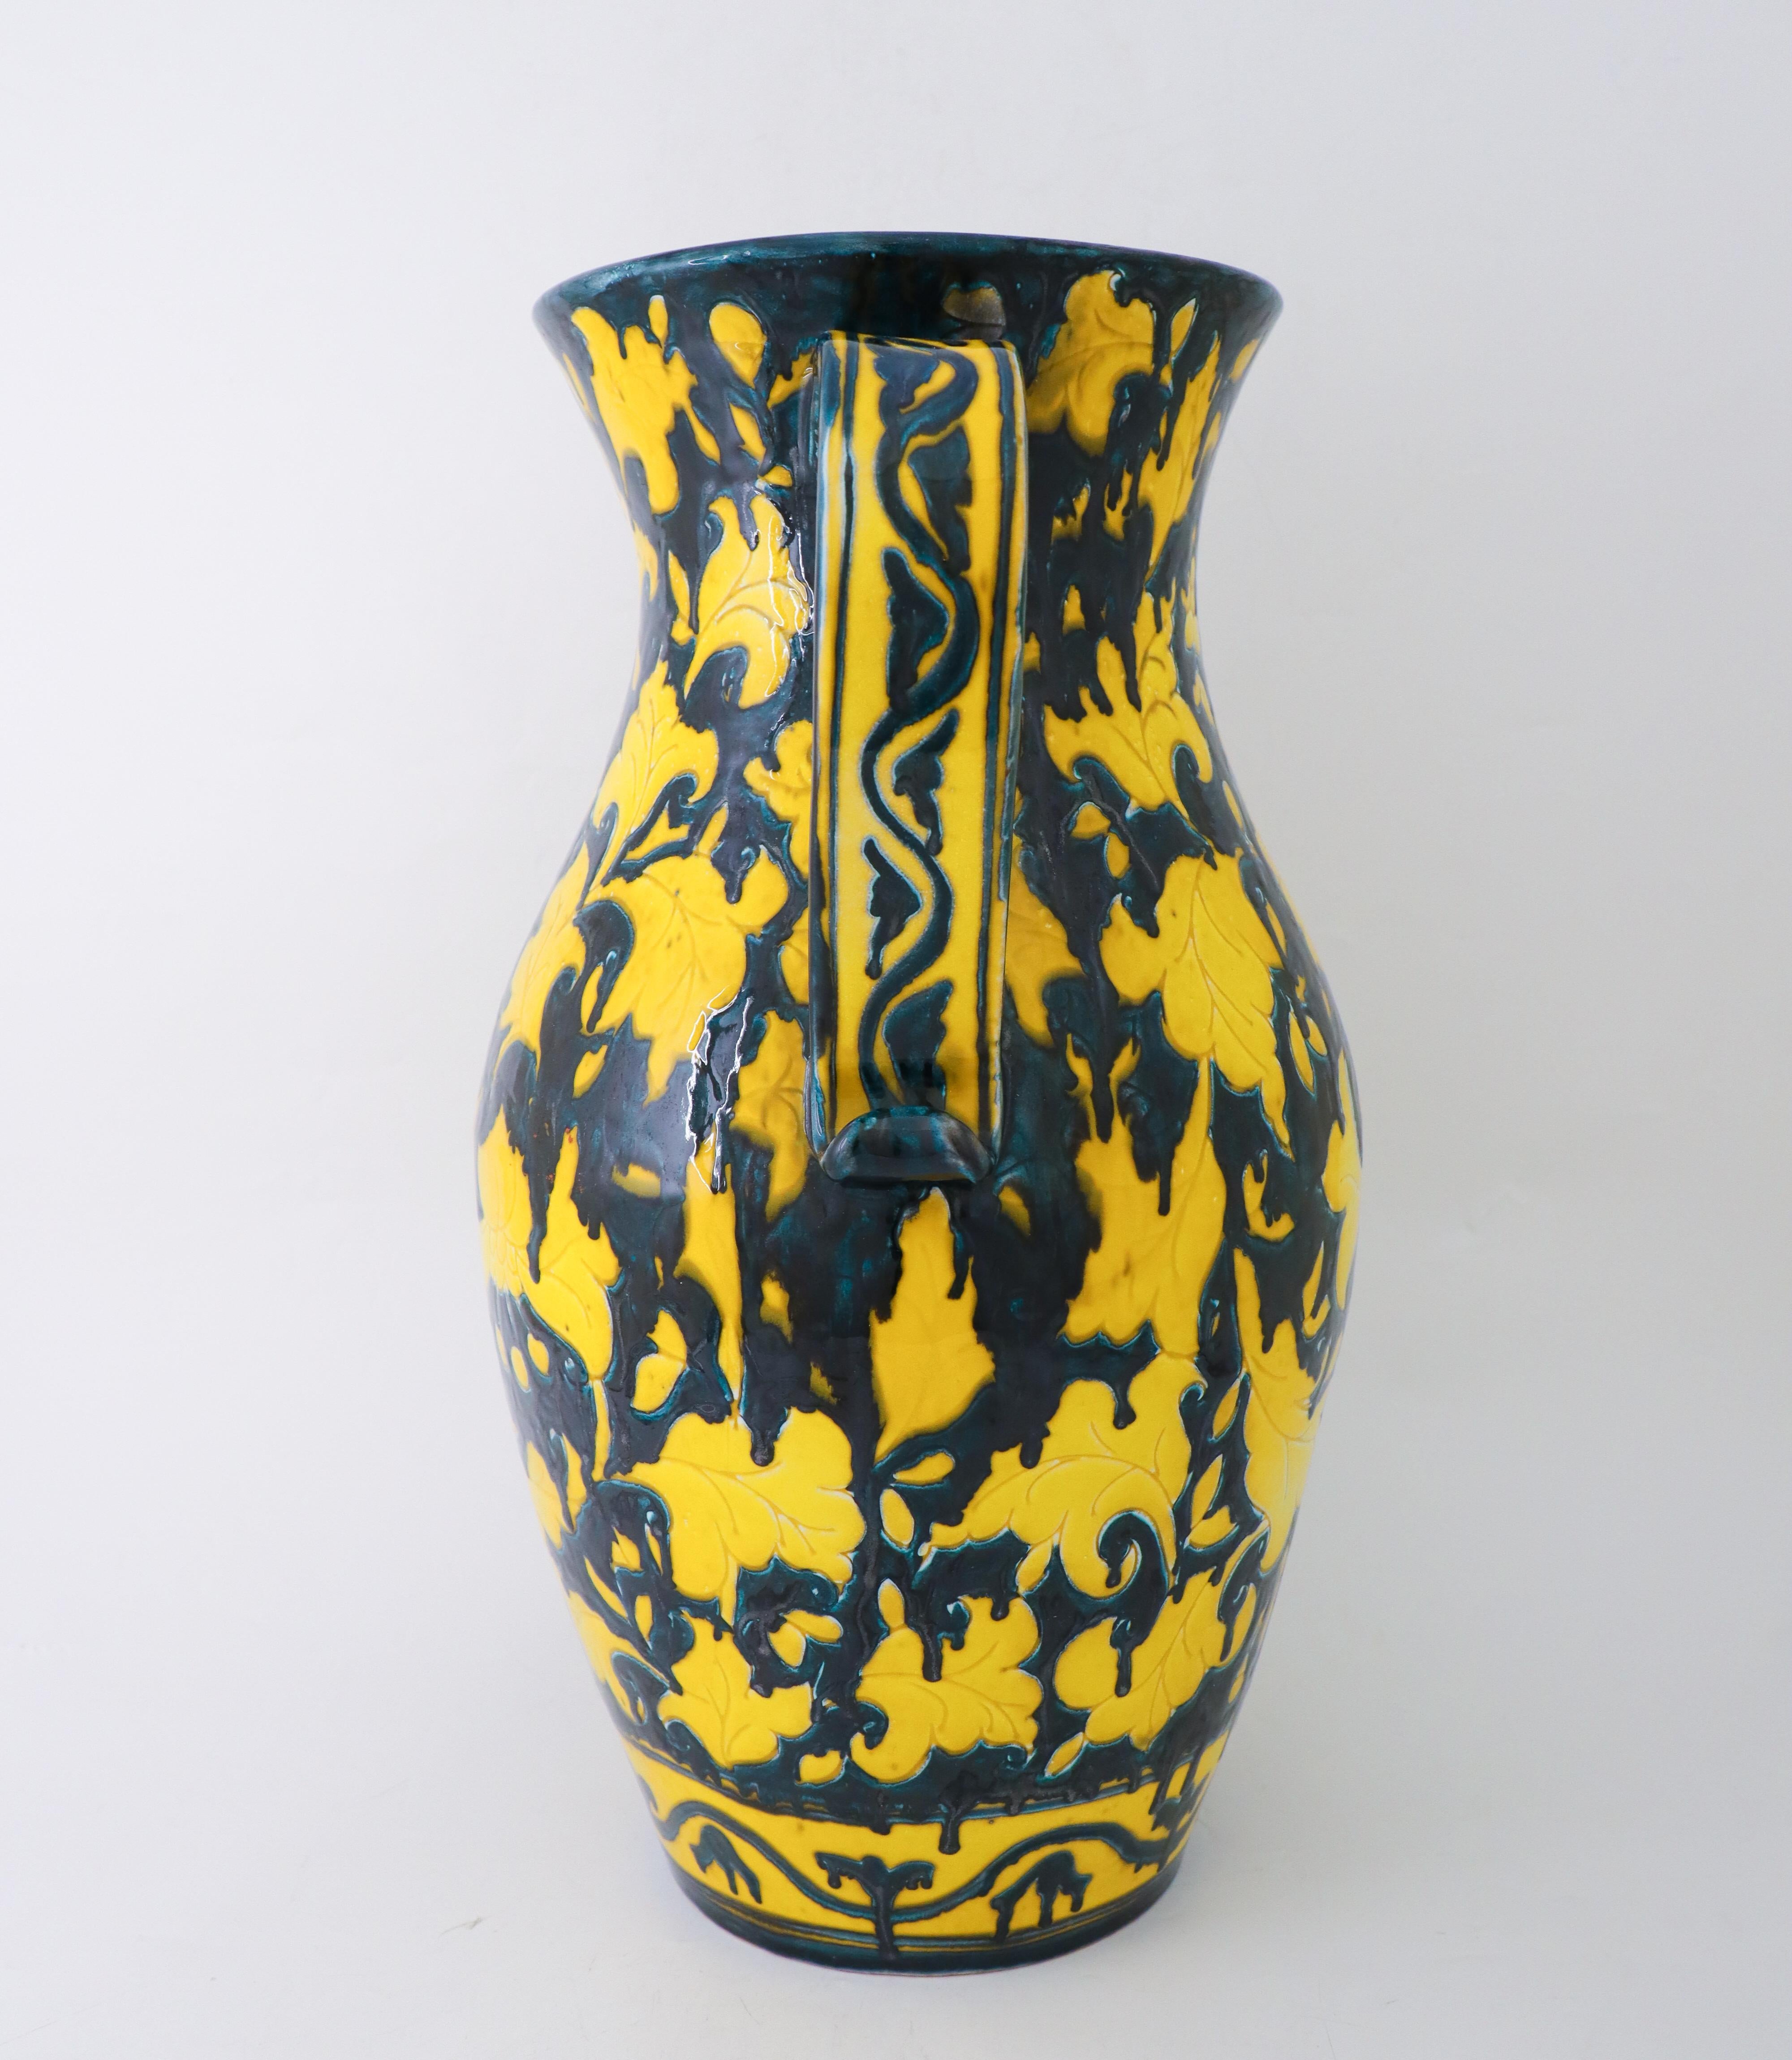 A lovely yellow and dark green jug in ceramic from Italy. It is 48 cm (19.2